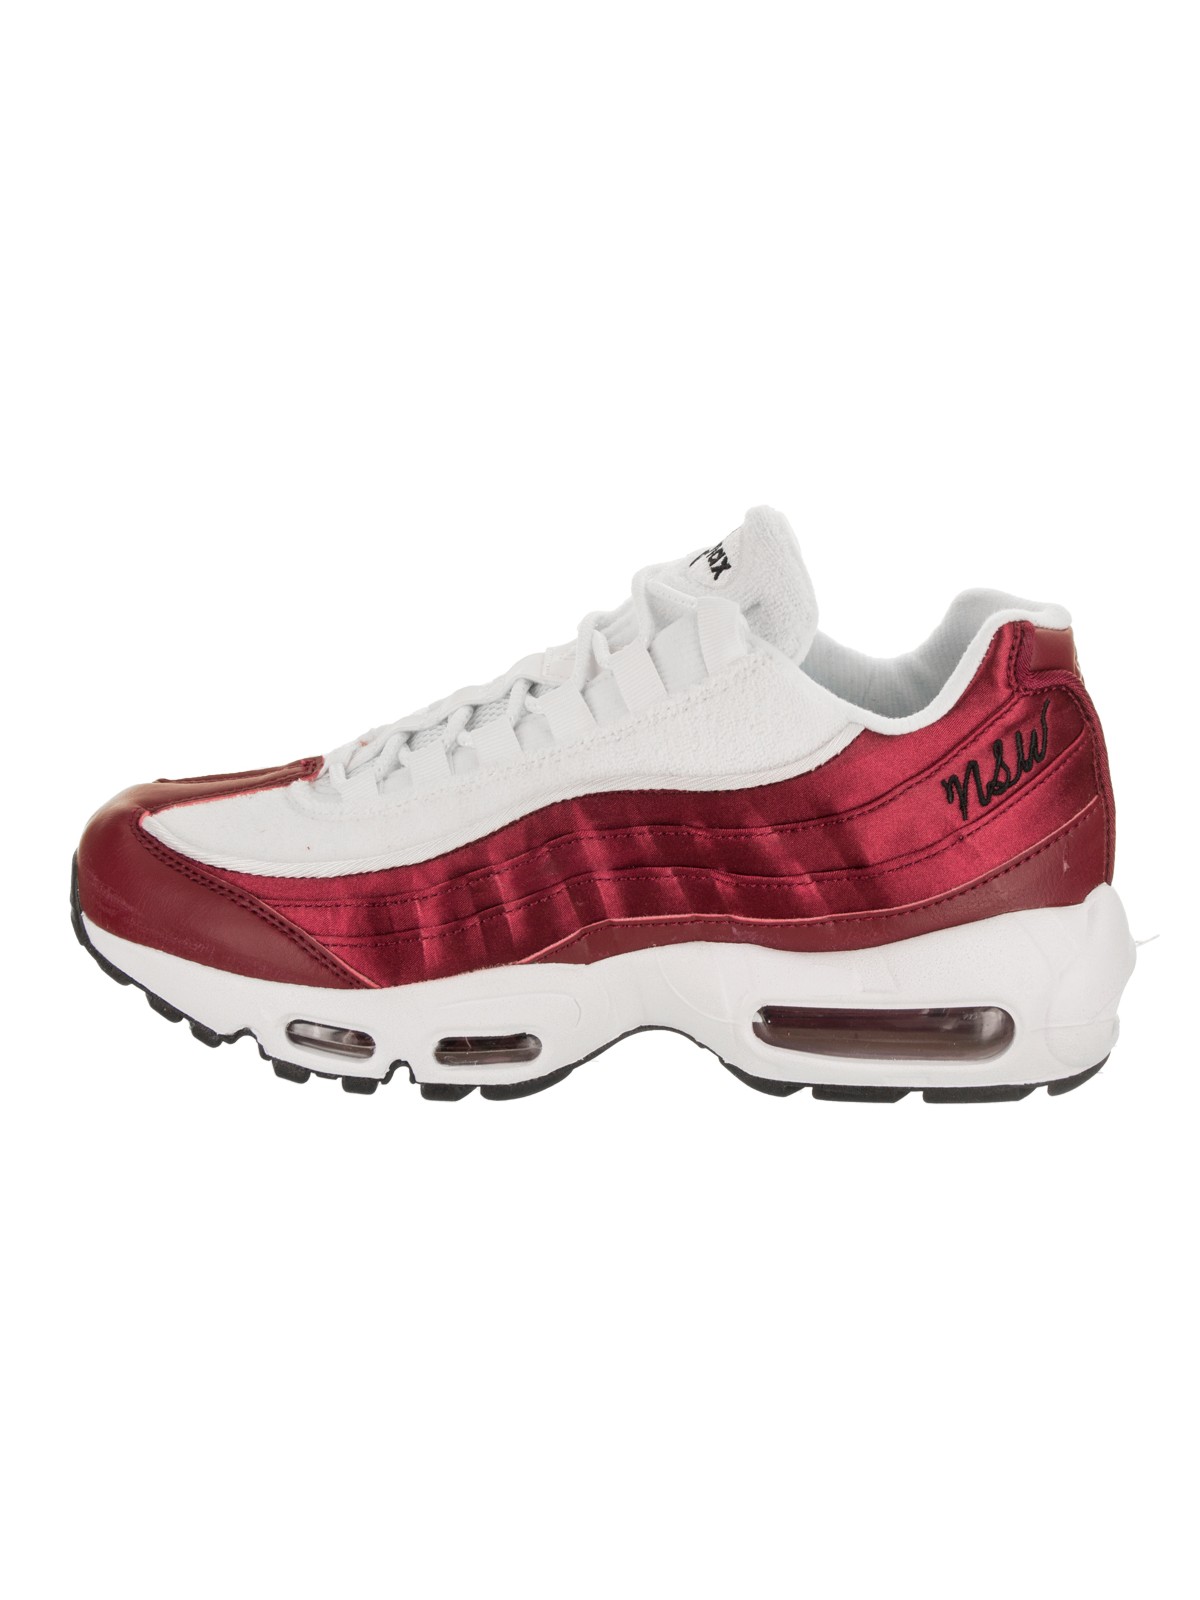 Nike Women's Air Max 95 LX Casual Shoe - image 3 of 5